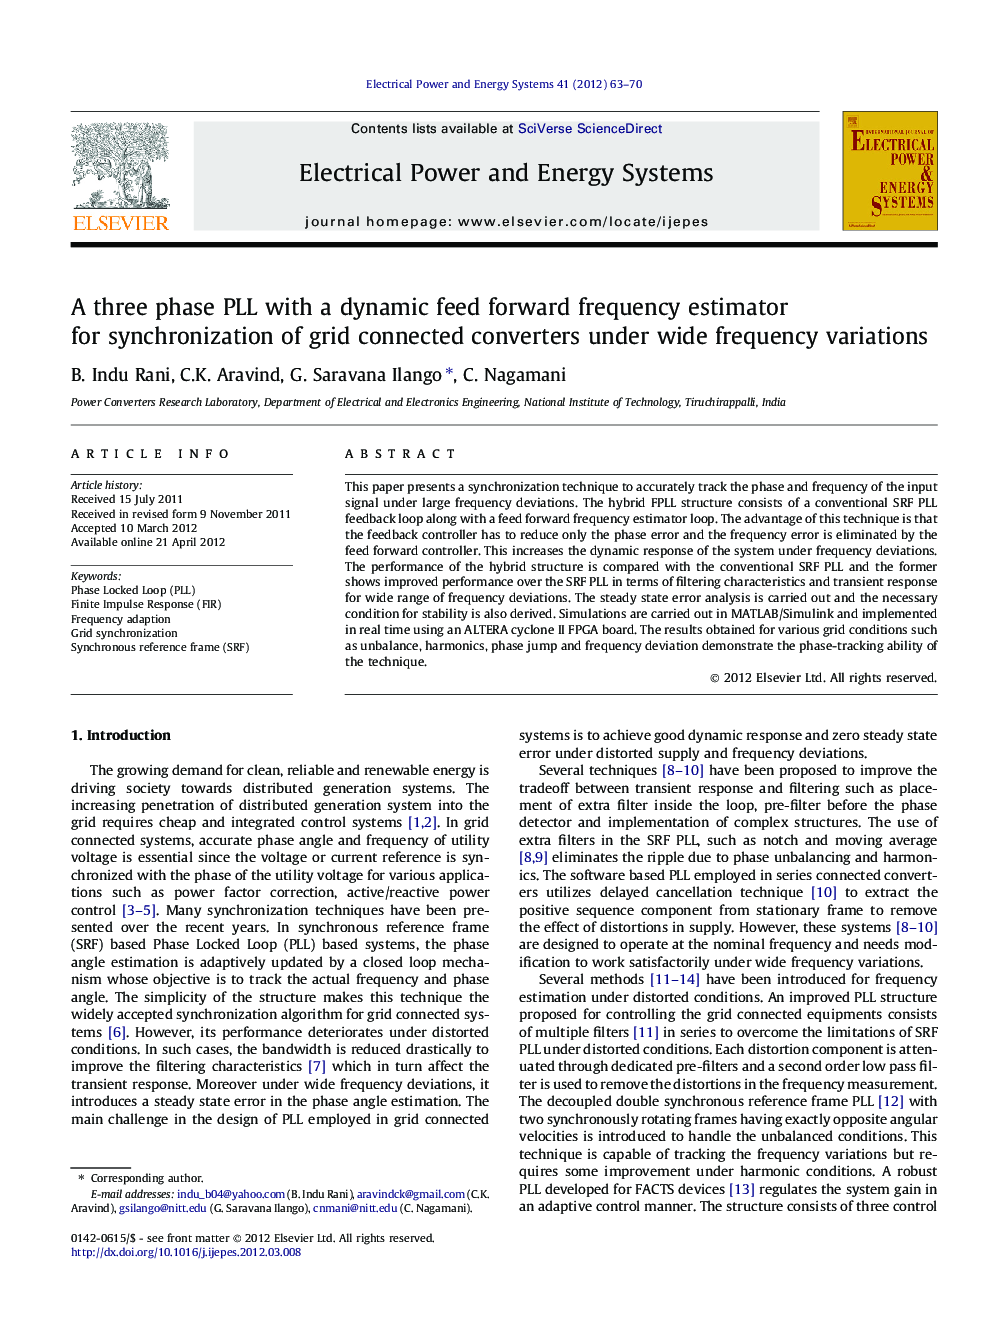 A three phase PLL with a dynamic feed forward frequency estimator for synchronization of grid connected converters under wide frequency variations